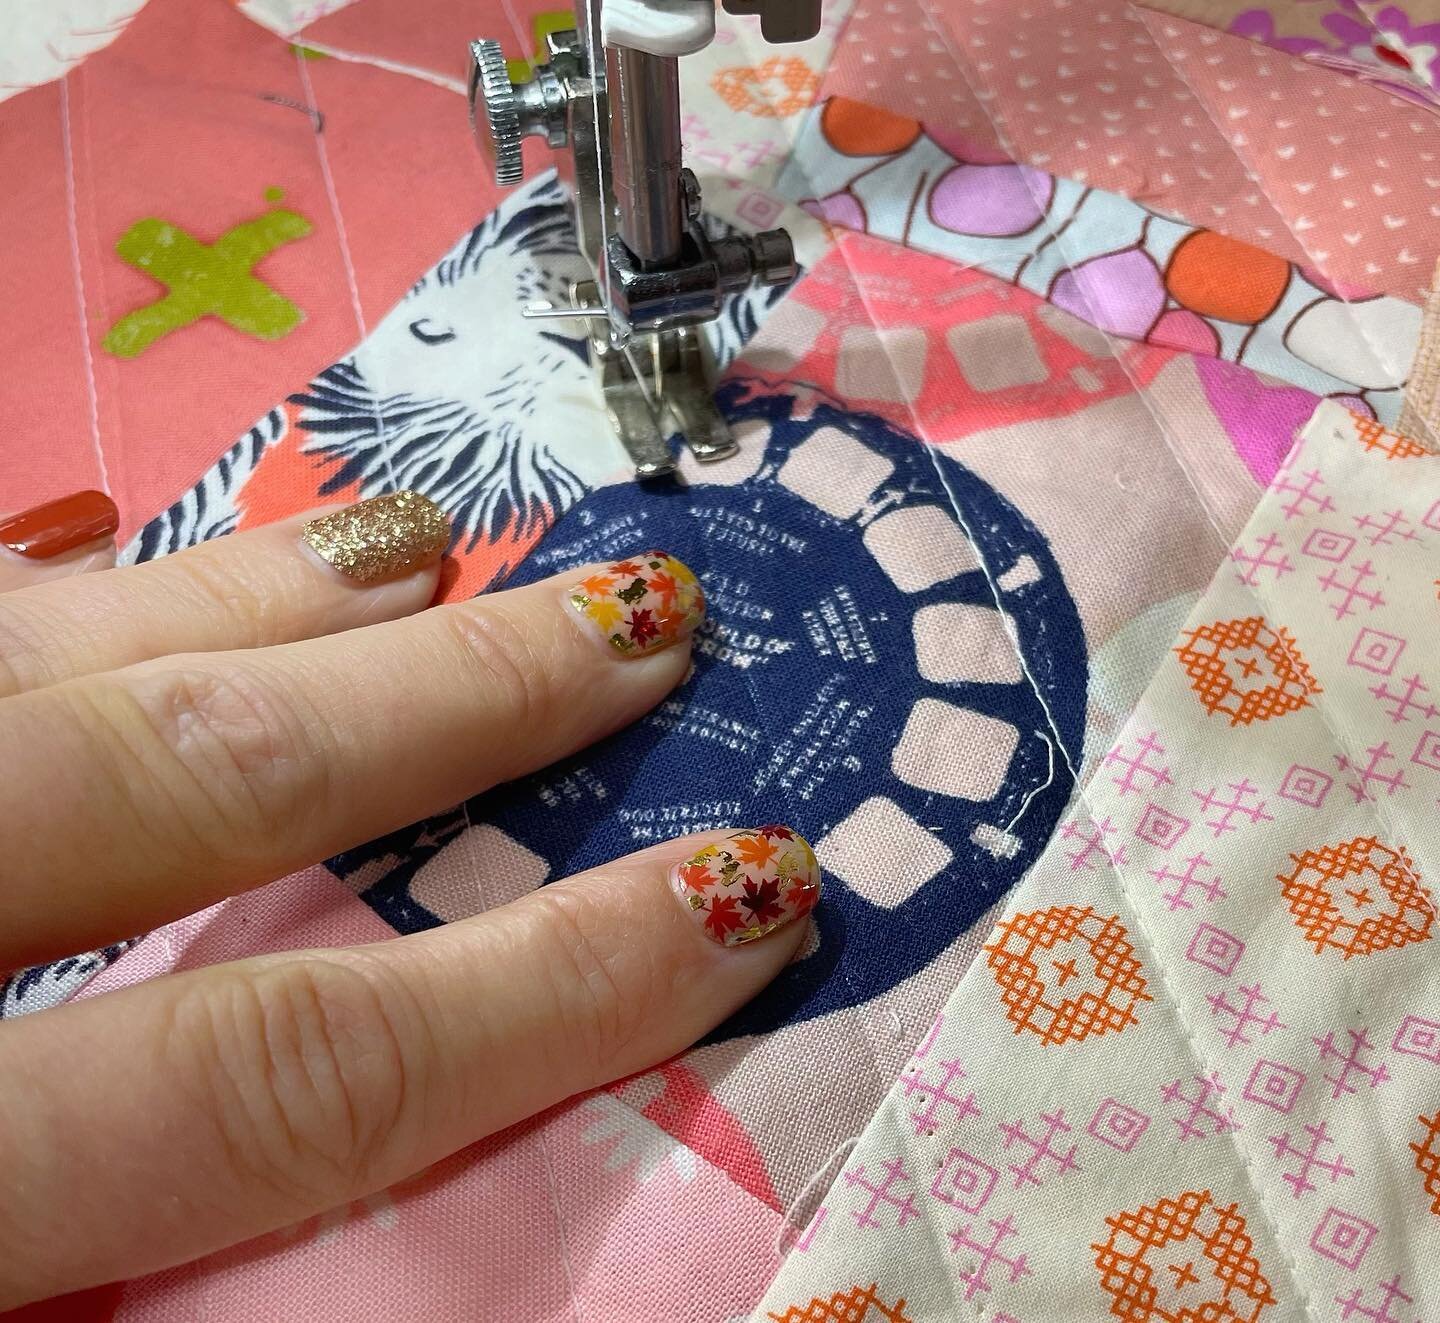 Making new stuff! Also obsessed with gel nail wraps!
.
Swipe for sewing action!
.
#sewing #dashingdiva #targetstyle